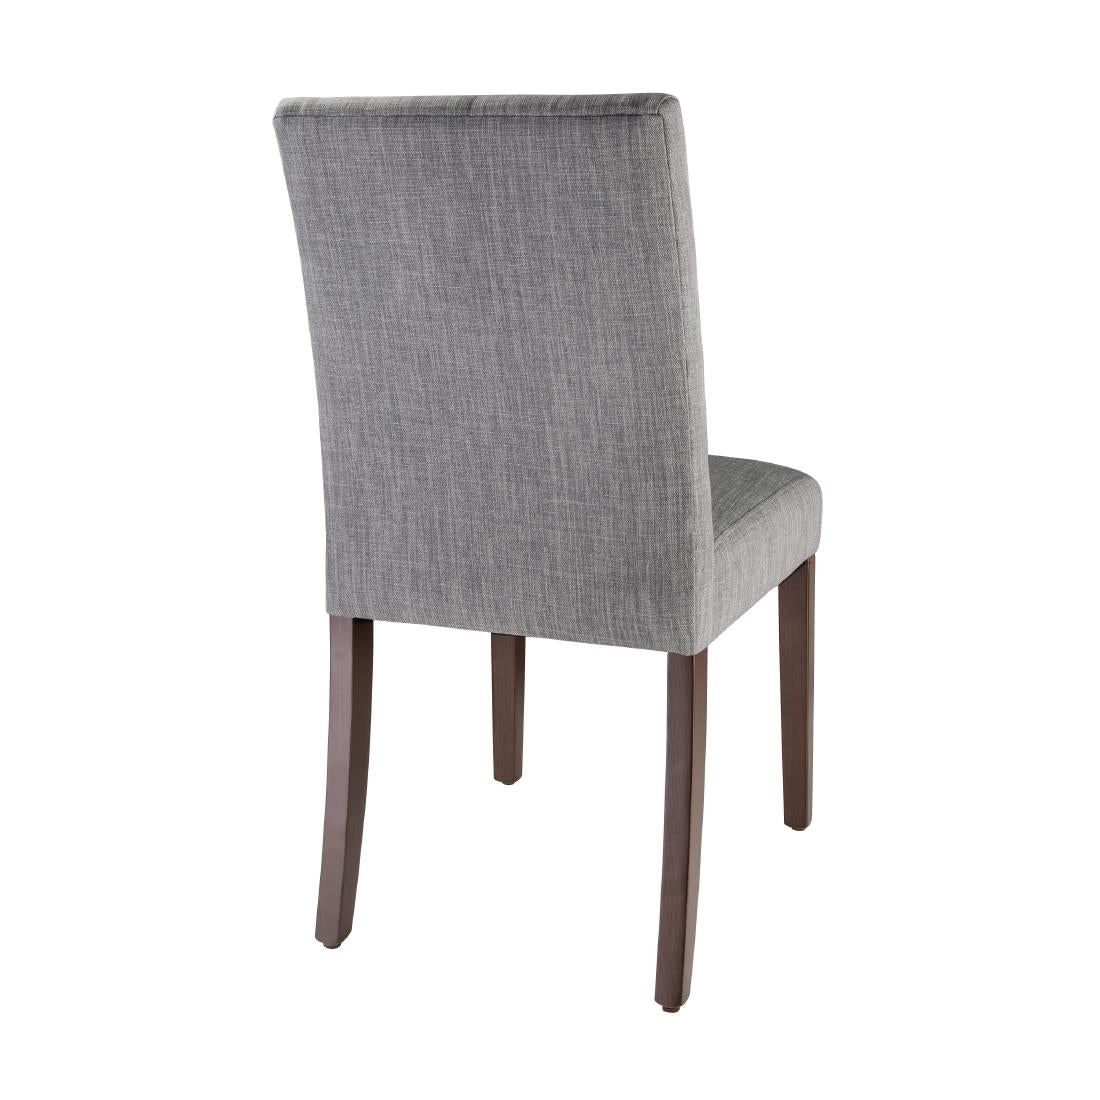 Bolero Chiswick Dining Chairs (Pack of 2) JD Catering Equipment Solutions Ltd